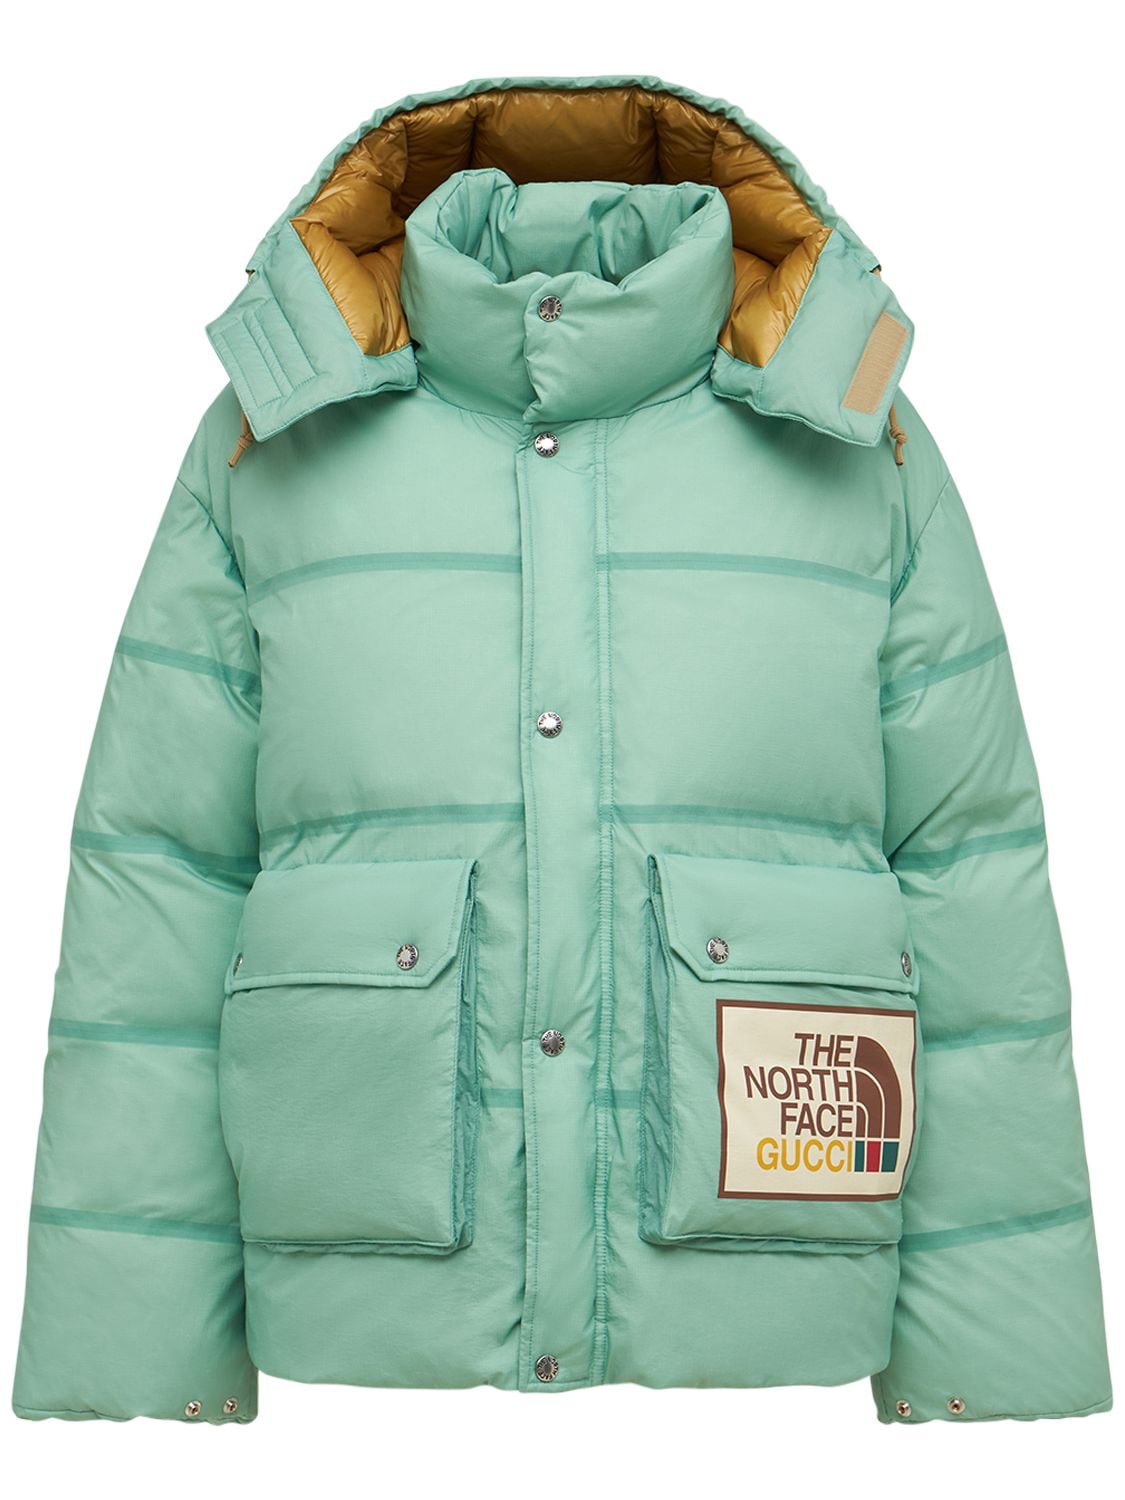 Gucci X The North Face Down Bomber Jacket For Women